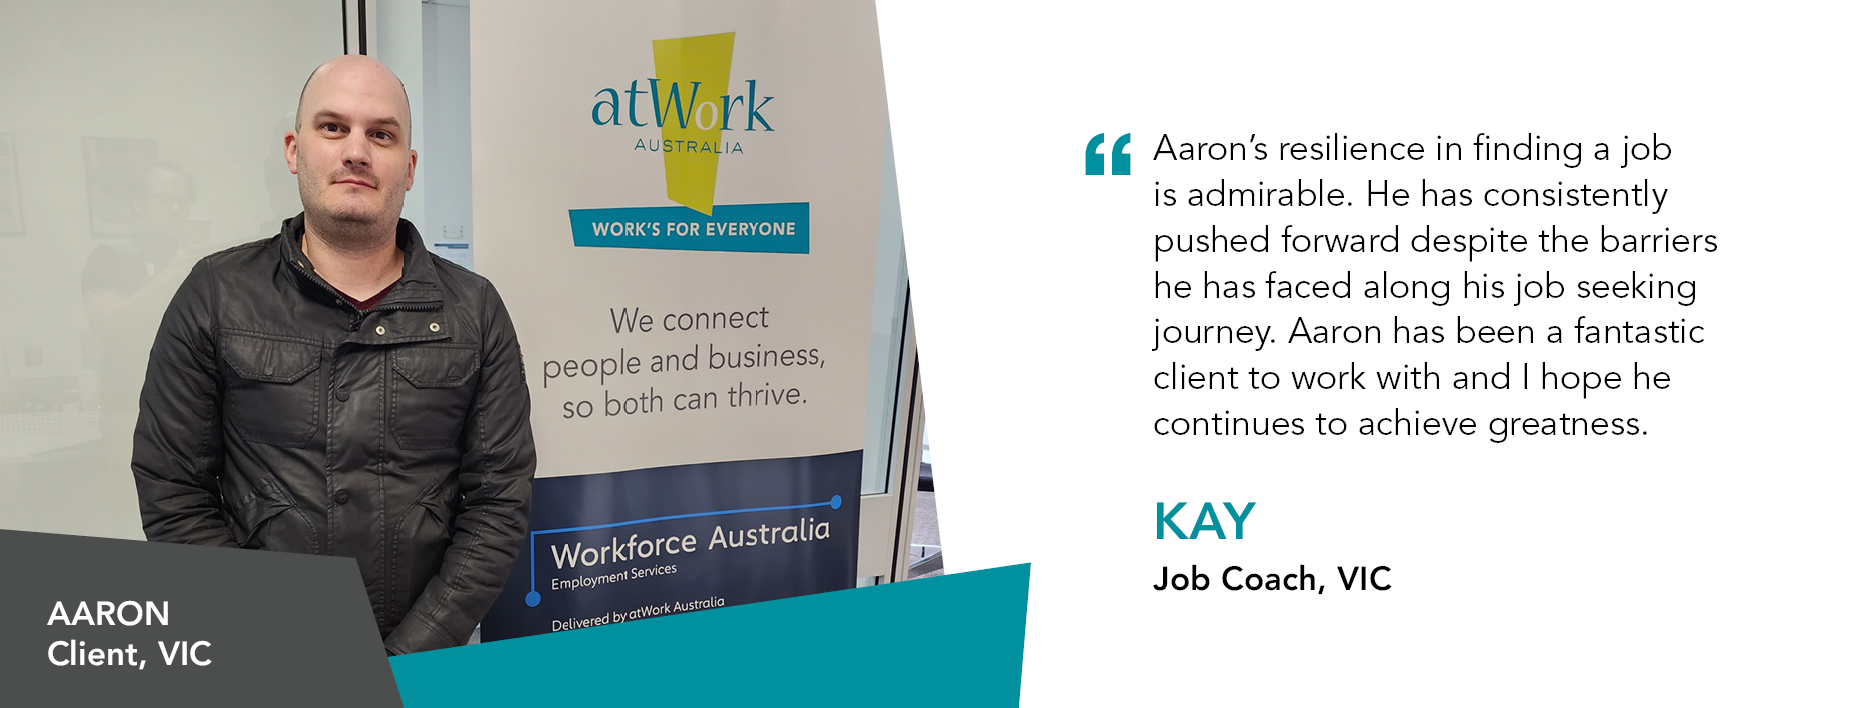 Quote reads: “Aaron’s resilience in finding a job is admirable, he has consistently pushed forward despite the barriers he has faced along his job seeking journey. Aaron has been a fantastic client to work with and I hope he continues to achieve greatness.” said Kay, Job Coach, VIC.